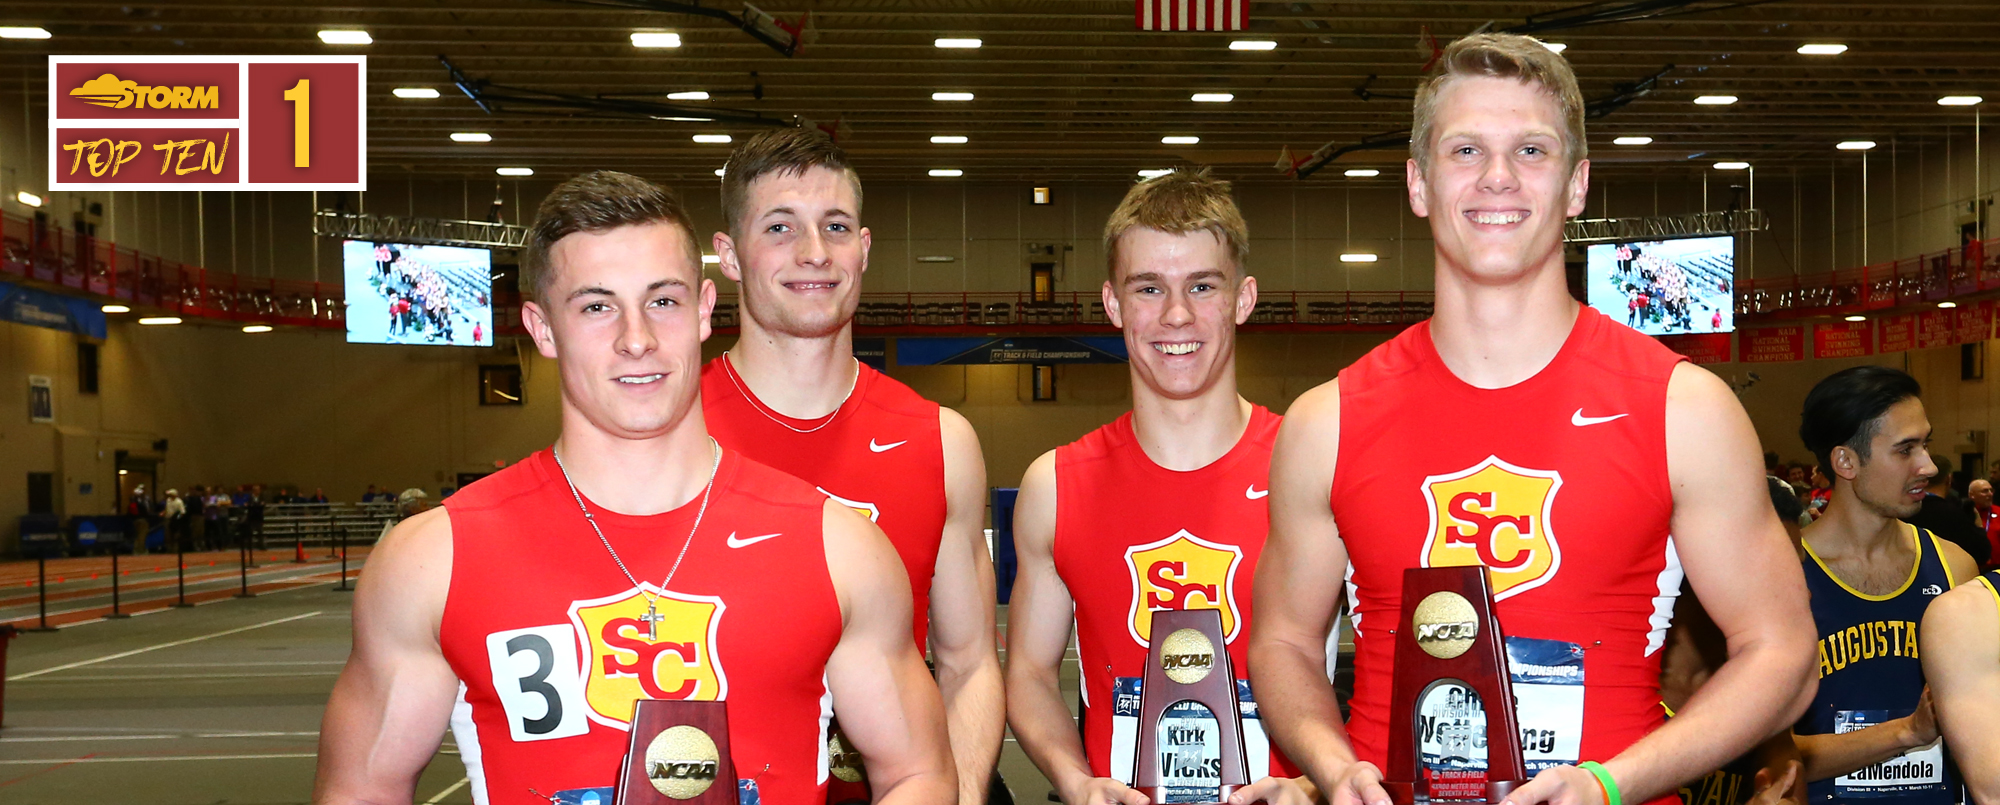 The All-American 4x400 relay team of Travis Tupper, Jordan Coughenour, Kirk Wicks and Chase Wetterling